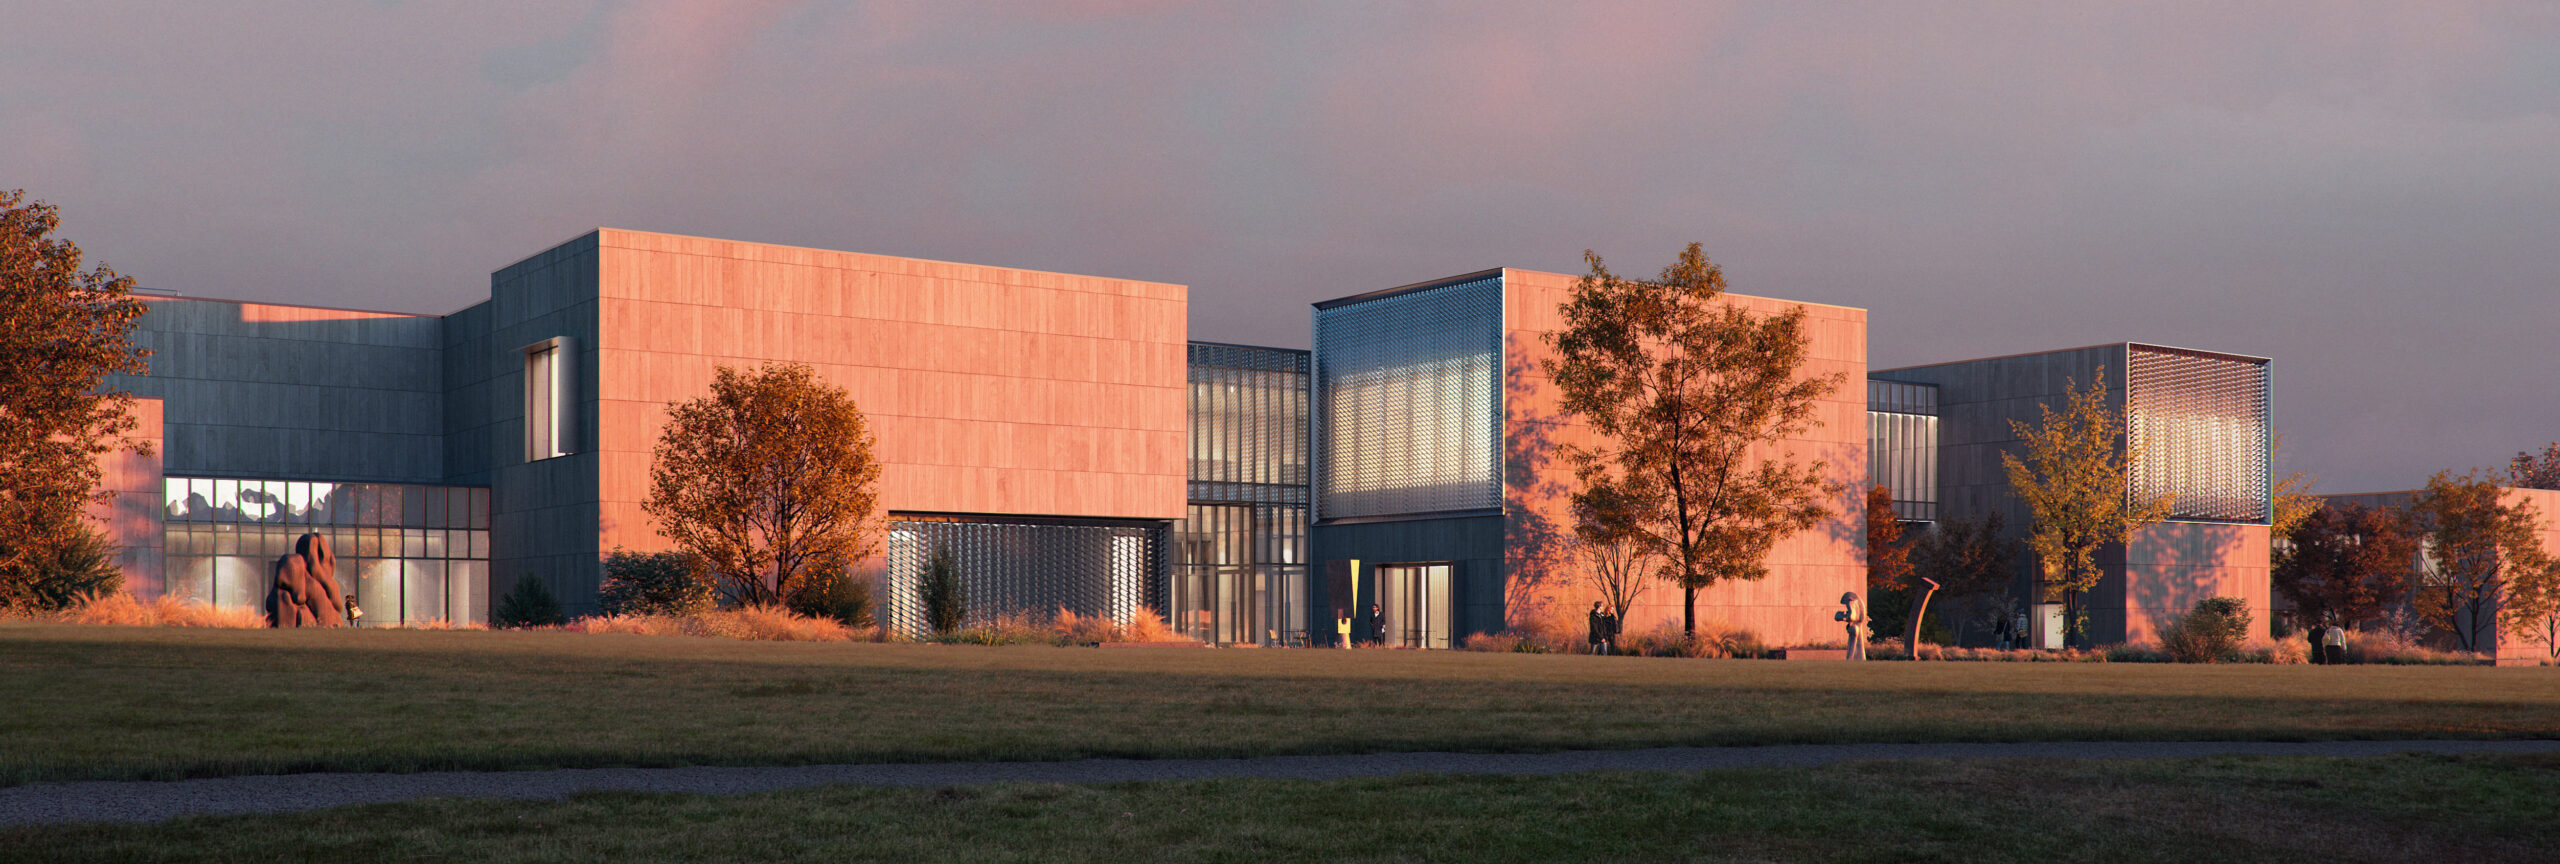 The new Palmer Museum of Art at Penn State. View from the Overlook Pavilion in the Arboretum. Architect: Allied Works. Rendering: Courtesy of MIR.